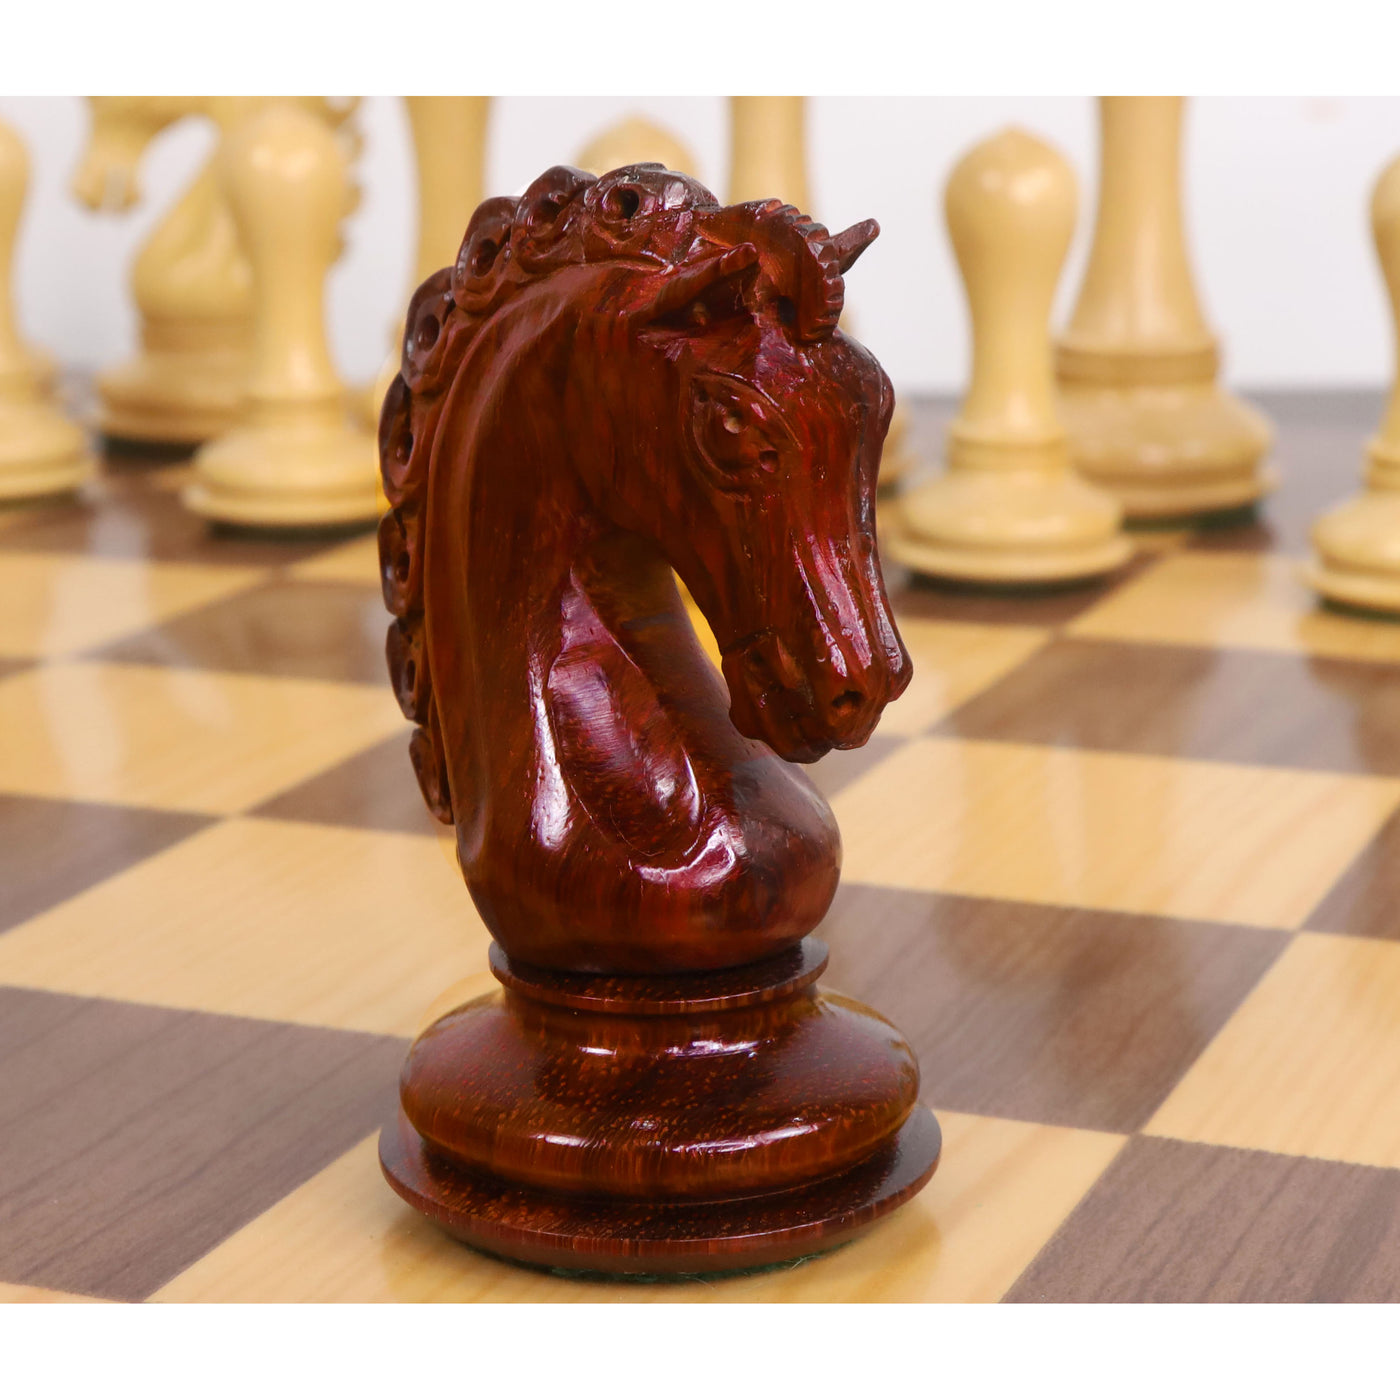 4.6" Avant Garde Luxury Staunton Chess Pieces Only Set - Triple Weighted - Bud Rosewood & Boxwood